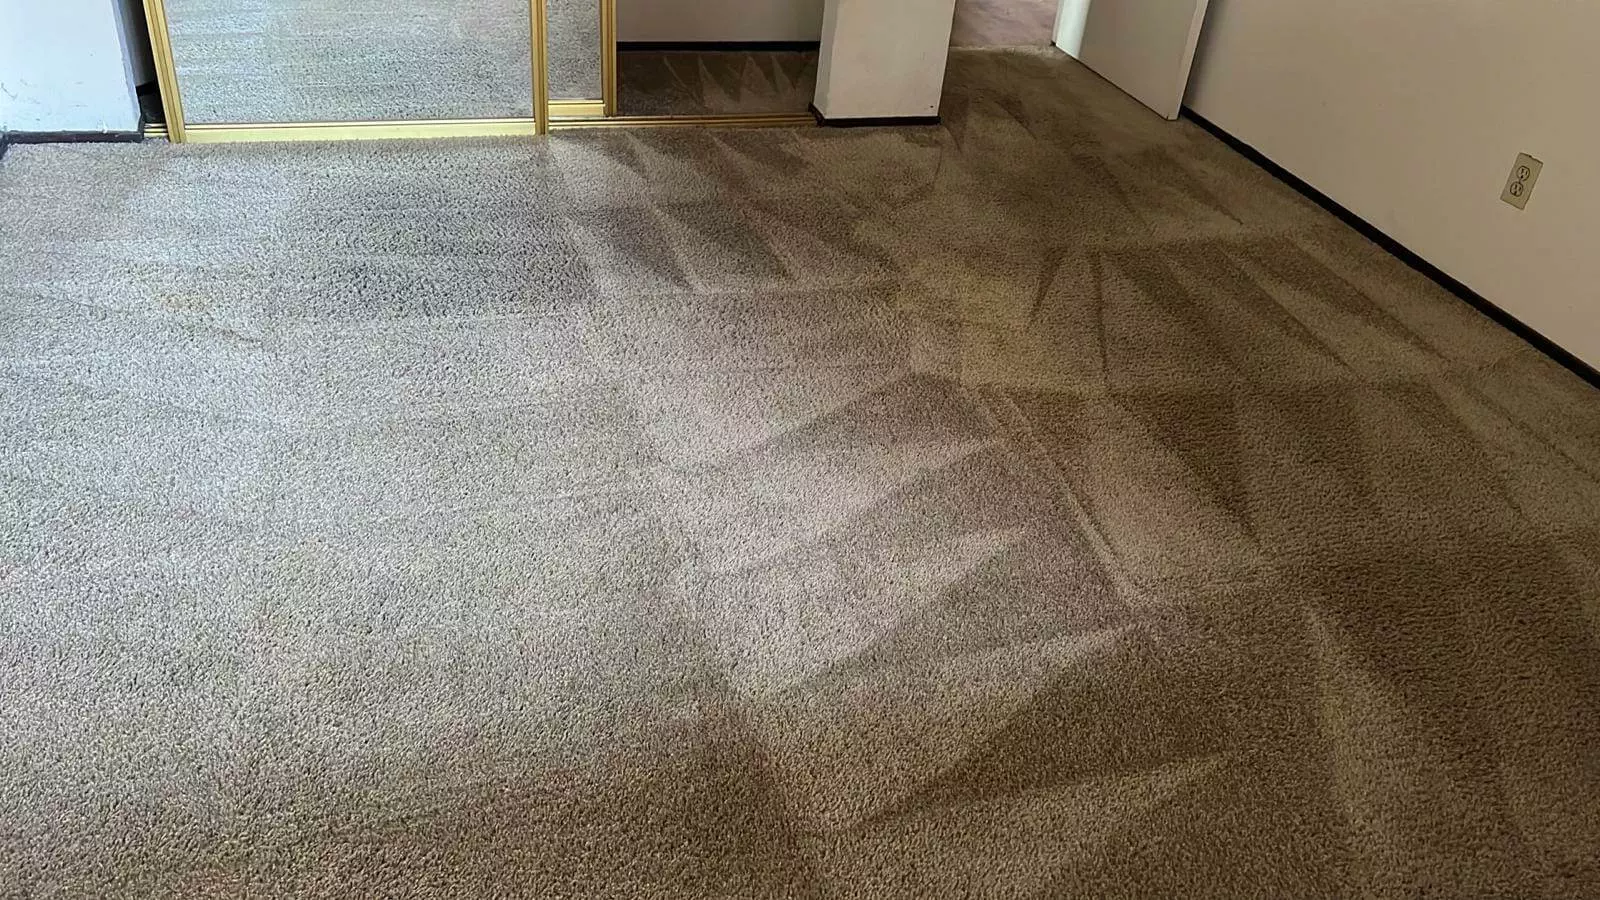 A room with a carpet that has been cleaned of chocolate stains.